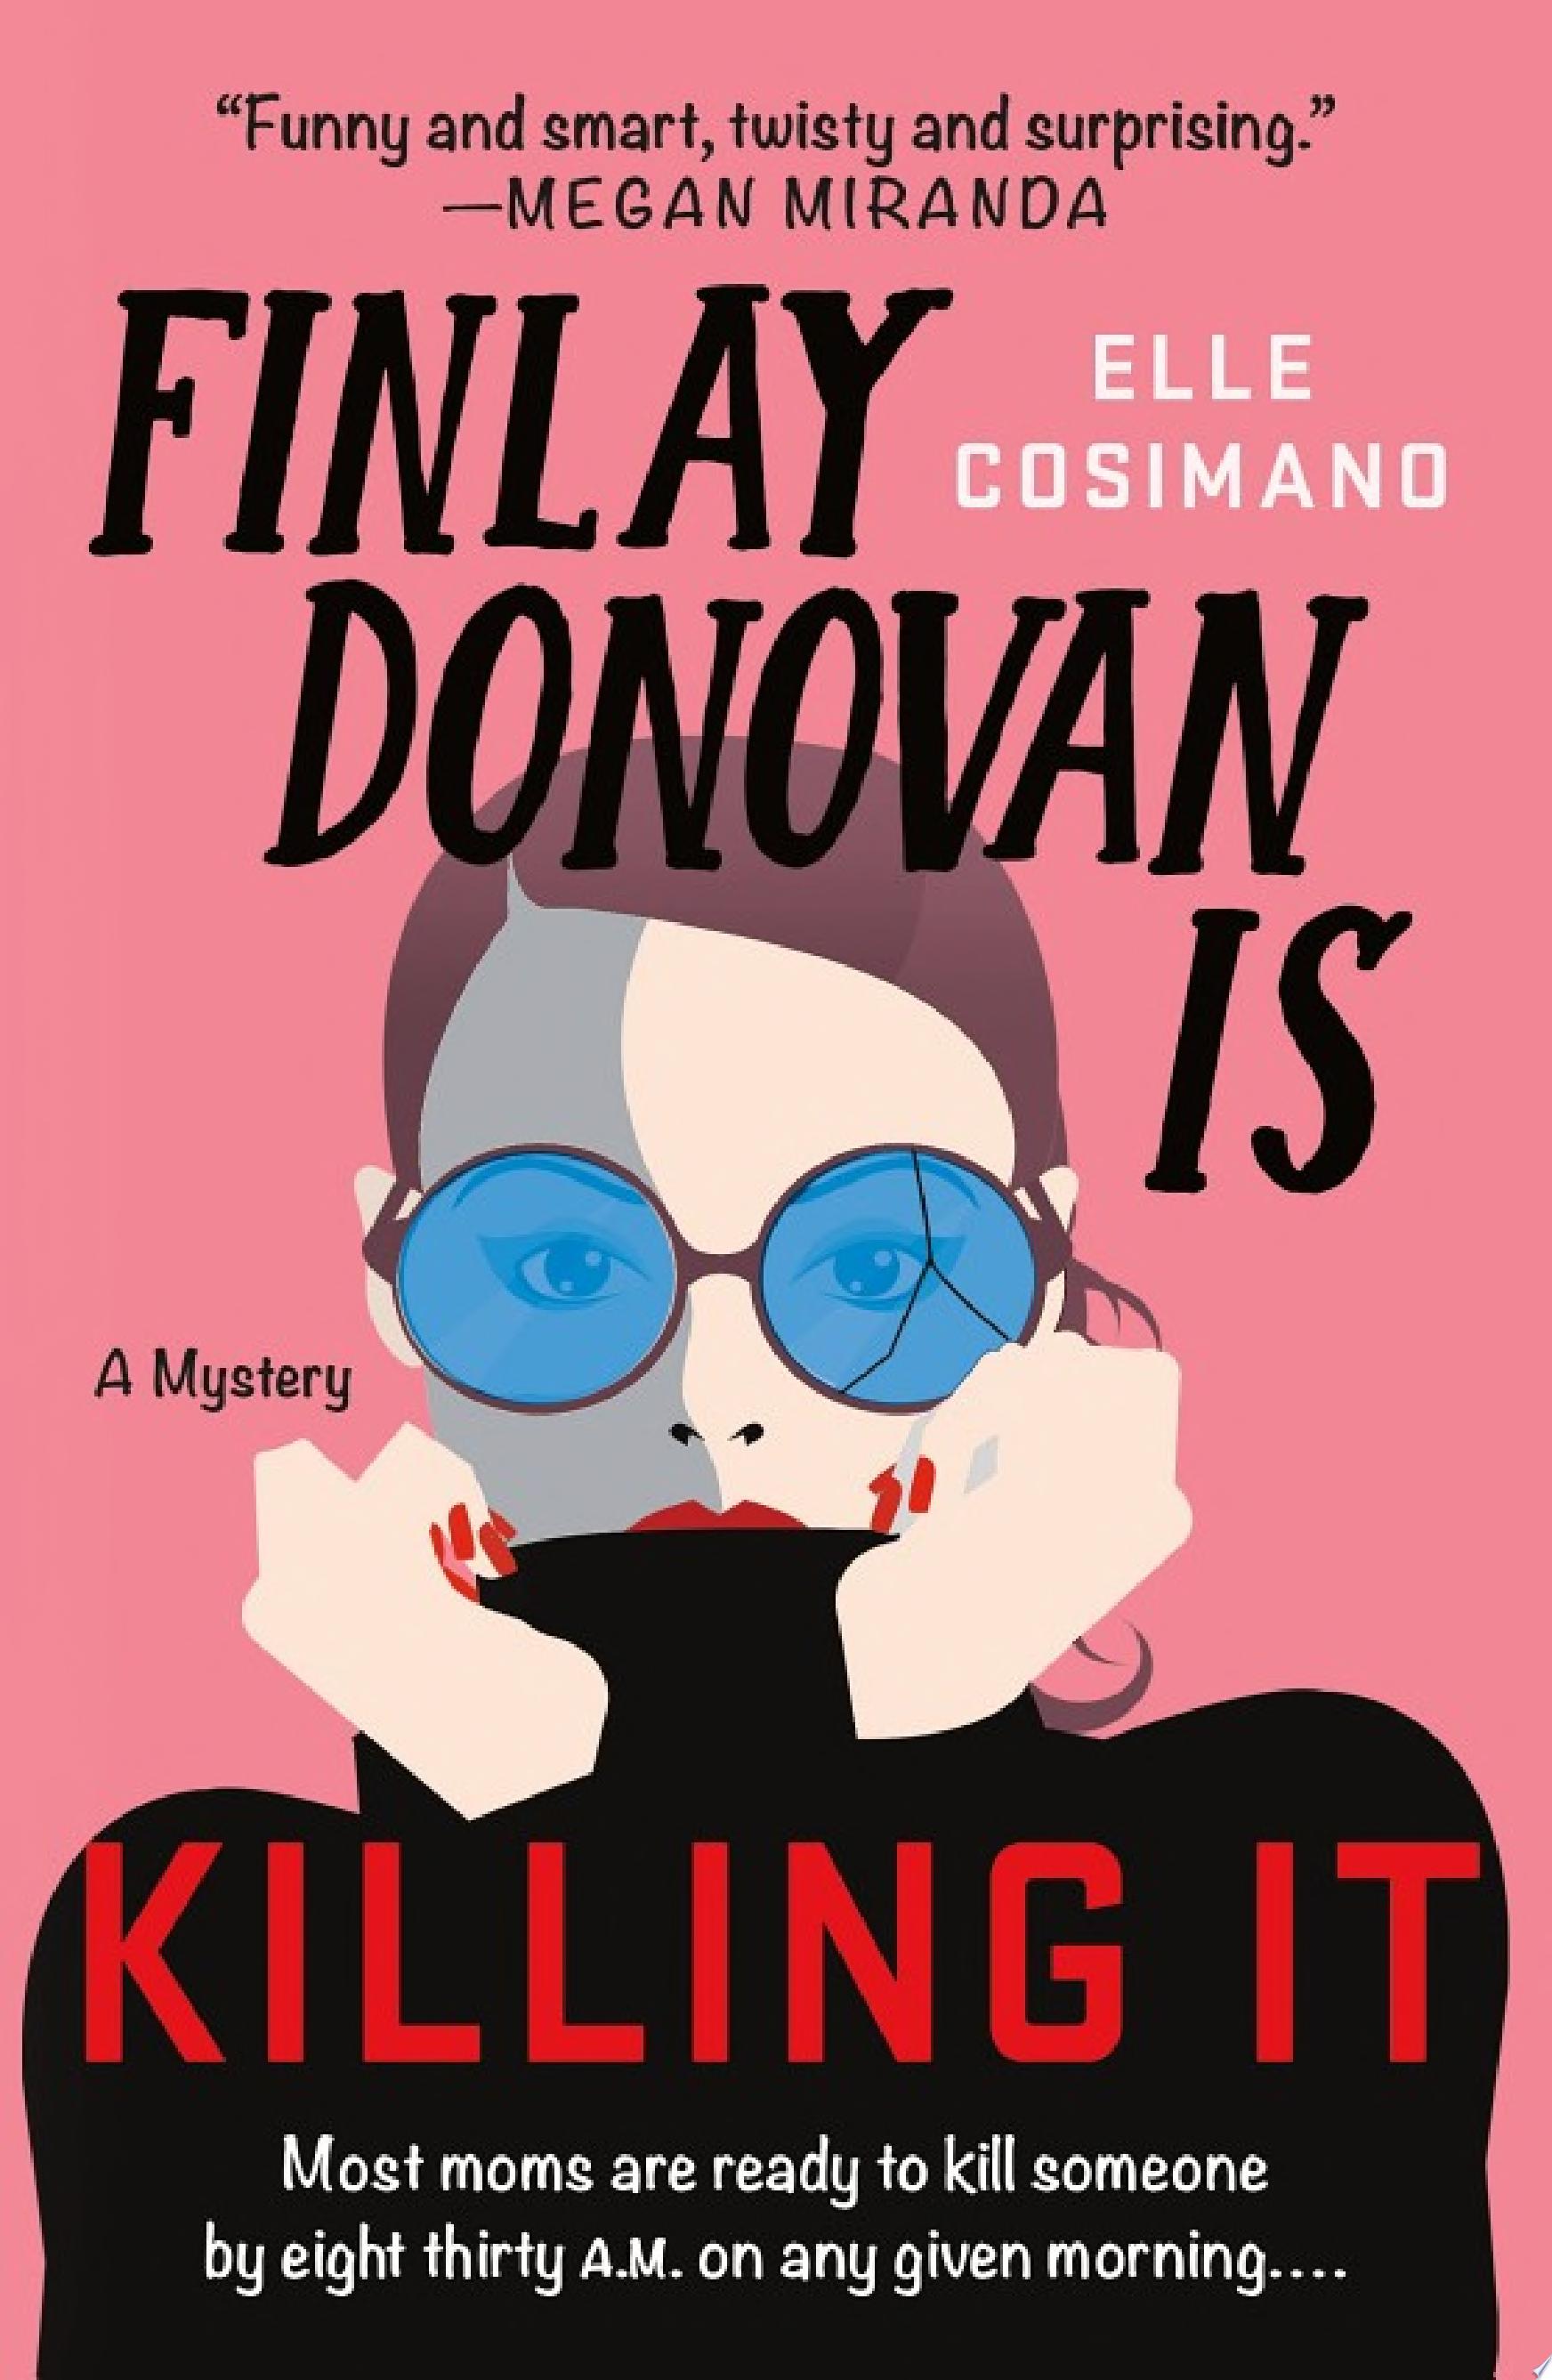 Image for "Finlay Donovan Is Killing It"